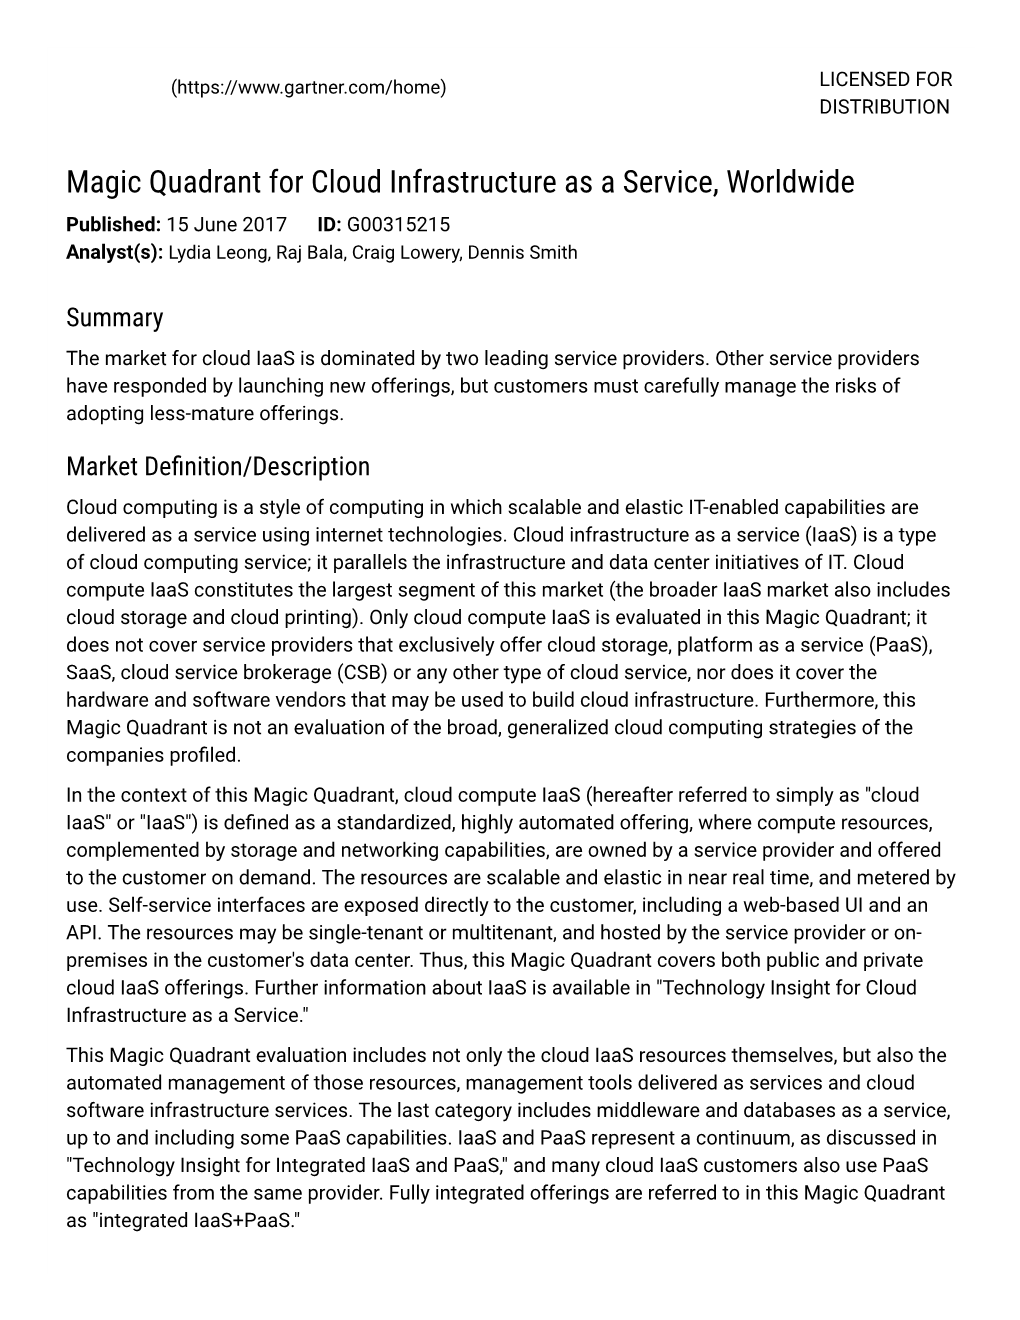 Magic Quadrant for Cloud Infrastructure As a Service, Worldwide Published: 15 June 2017 ID: G00315215 Analyst(S): Lydia Leong, Raj Bala, Craig Lowery, Dennis Smith